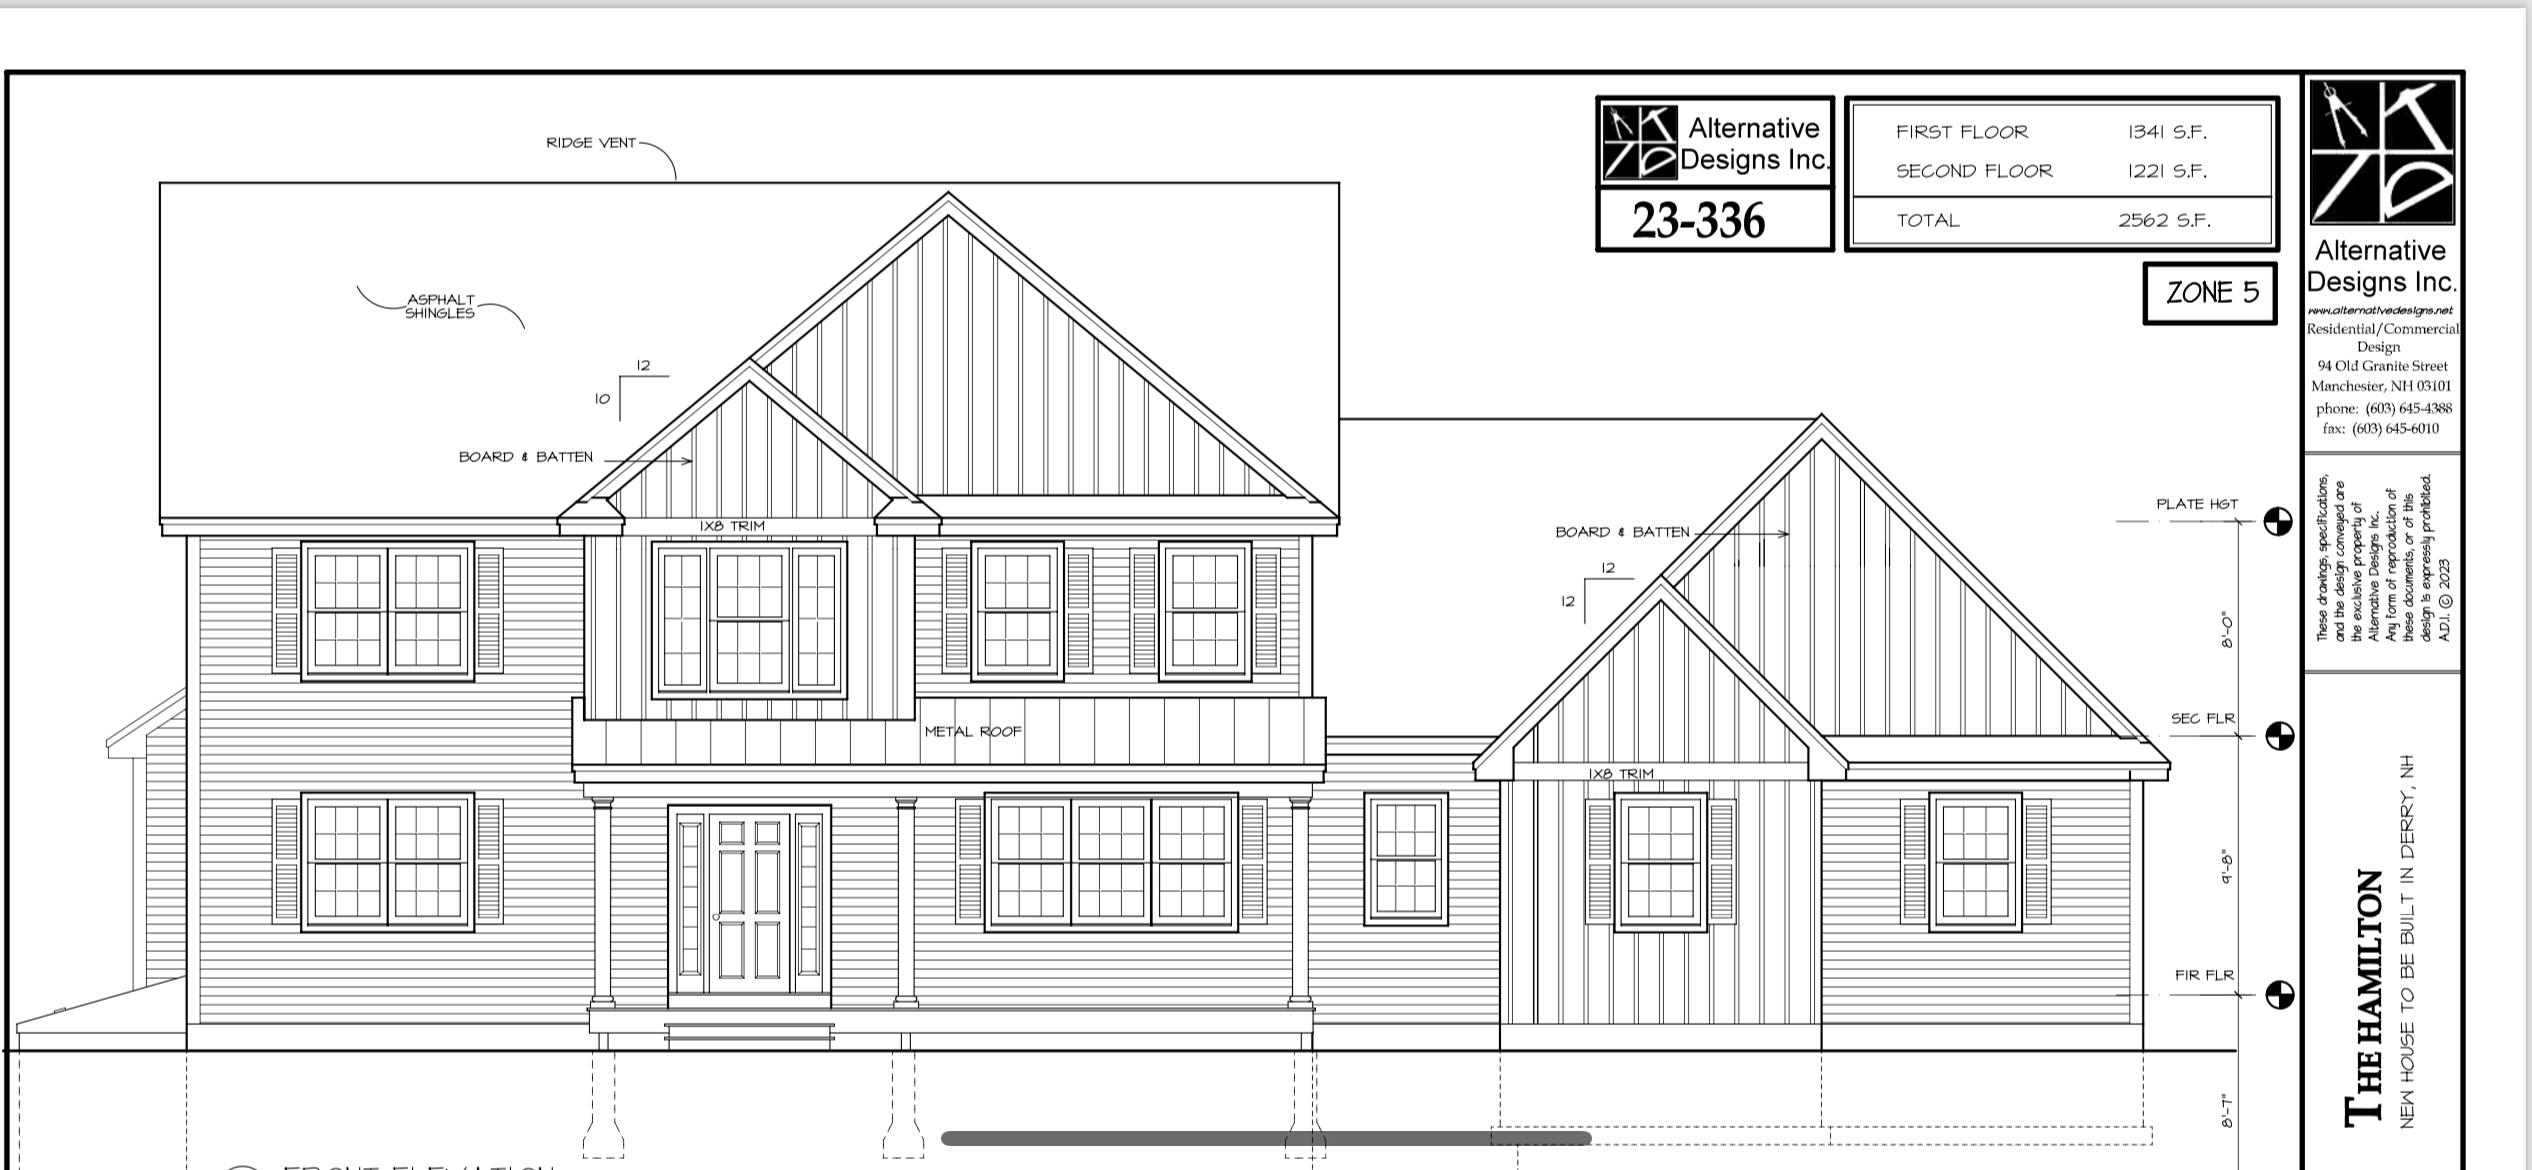 TO BE BUILT- A spacious 2,600 sqft colonial home will feature 4 bedrooms, 2.5 baths and a 3-car attached garage. The home will be set on a 2.85 acre wooded and private lot, offering tranquility and natural surroundings. The first floor will feature 9' ceilings, an inviting open concept kitchen/living area that will be great for entertaining. A dining room with tray ceilings, an office/study, laundry room, half bath and mudroom will complete the first floor. Make your way up the staircase boasting beautiful hardwood oak tread. The second floor will feature a spacious primary bedroom and bath. The primary bathroom will include a luxurious soaking tub, tiled walk-in shower and double vanity for added convenience. Additionally, there will be 3 more bedrooms and another full bath.  The plans include a walk out basement for added accessibility and functionality. A back deck will be built to extend outdoor living space and a front farmers porch to offer a charming and welcoming entryway. The septic plan is approved for an ADU. Come and claim this home today! ***Do not walk the property without permission from agent